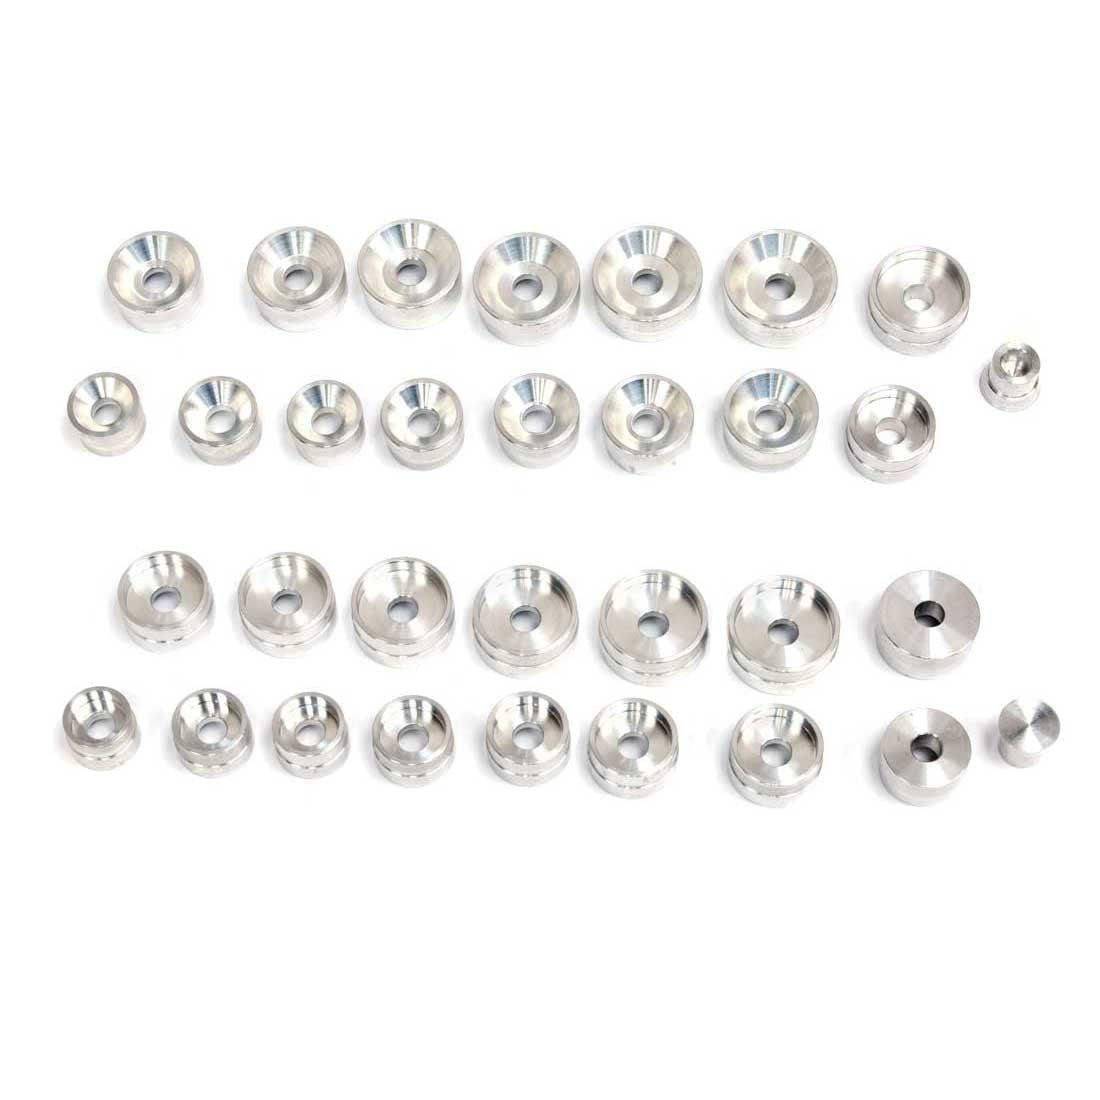 Set of 16 Bevel/Straight Aluminum Dies to fit BB Press (MADE USA)